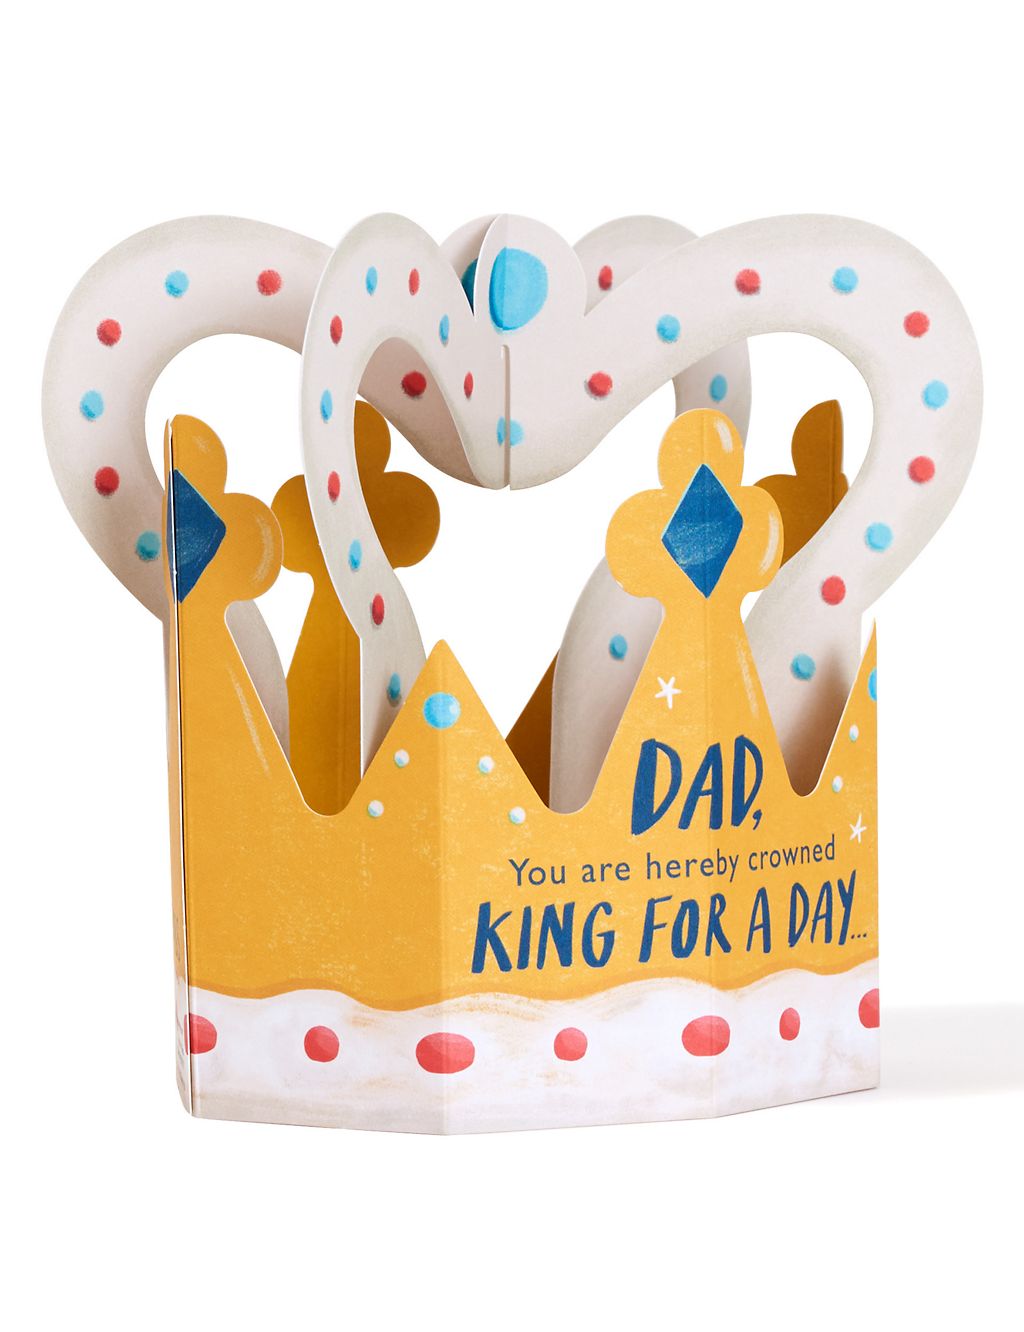 3D Pop-up Crown Father's Day Card for Dad 1 of 3